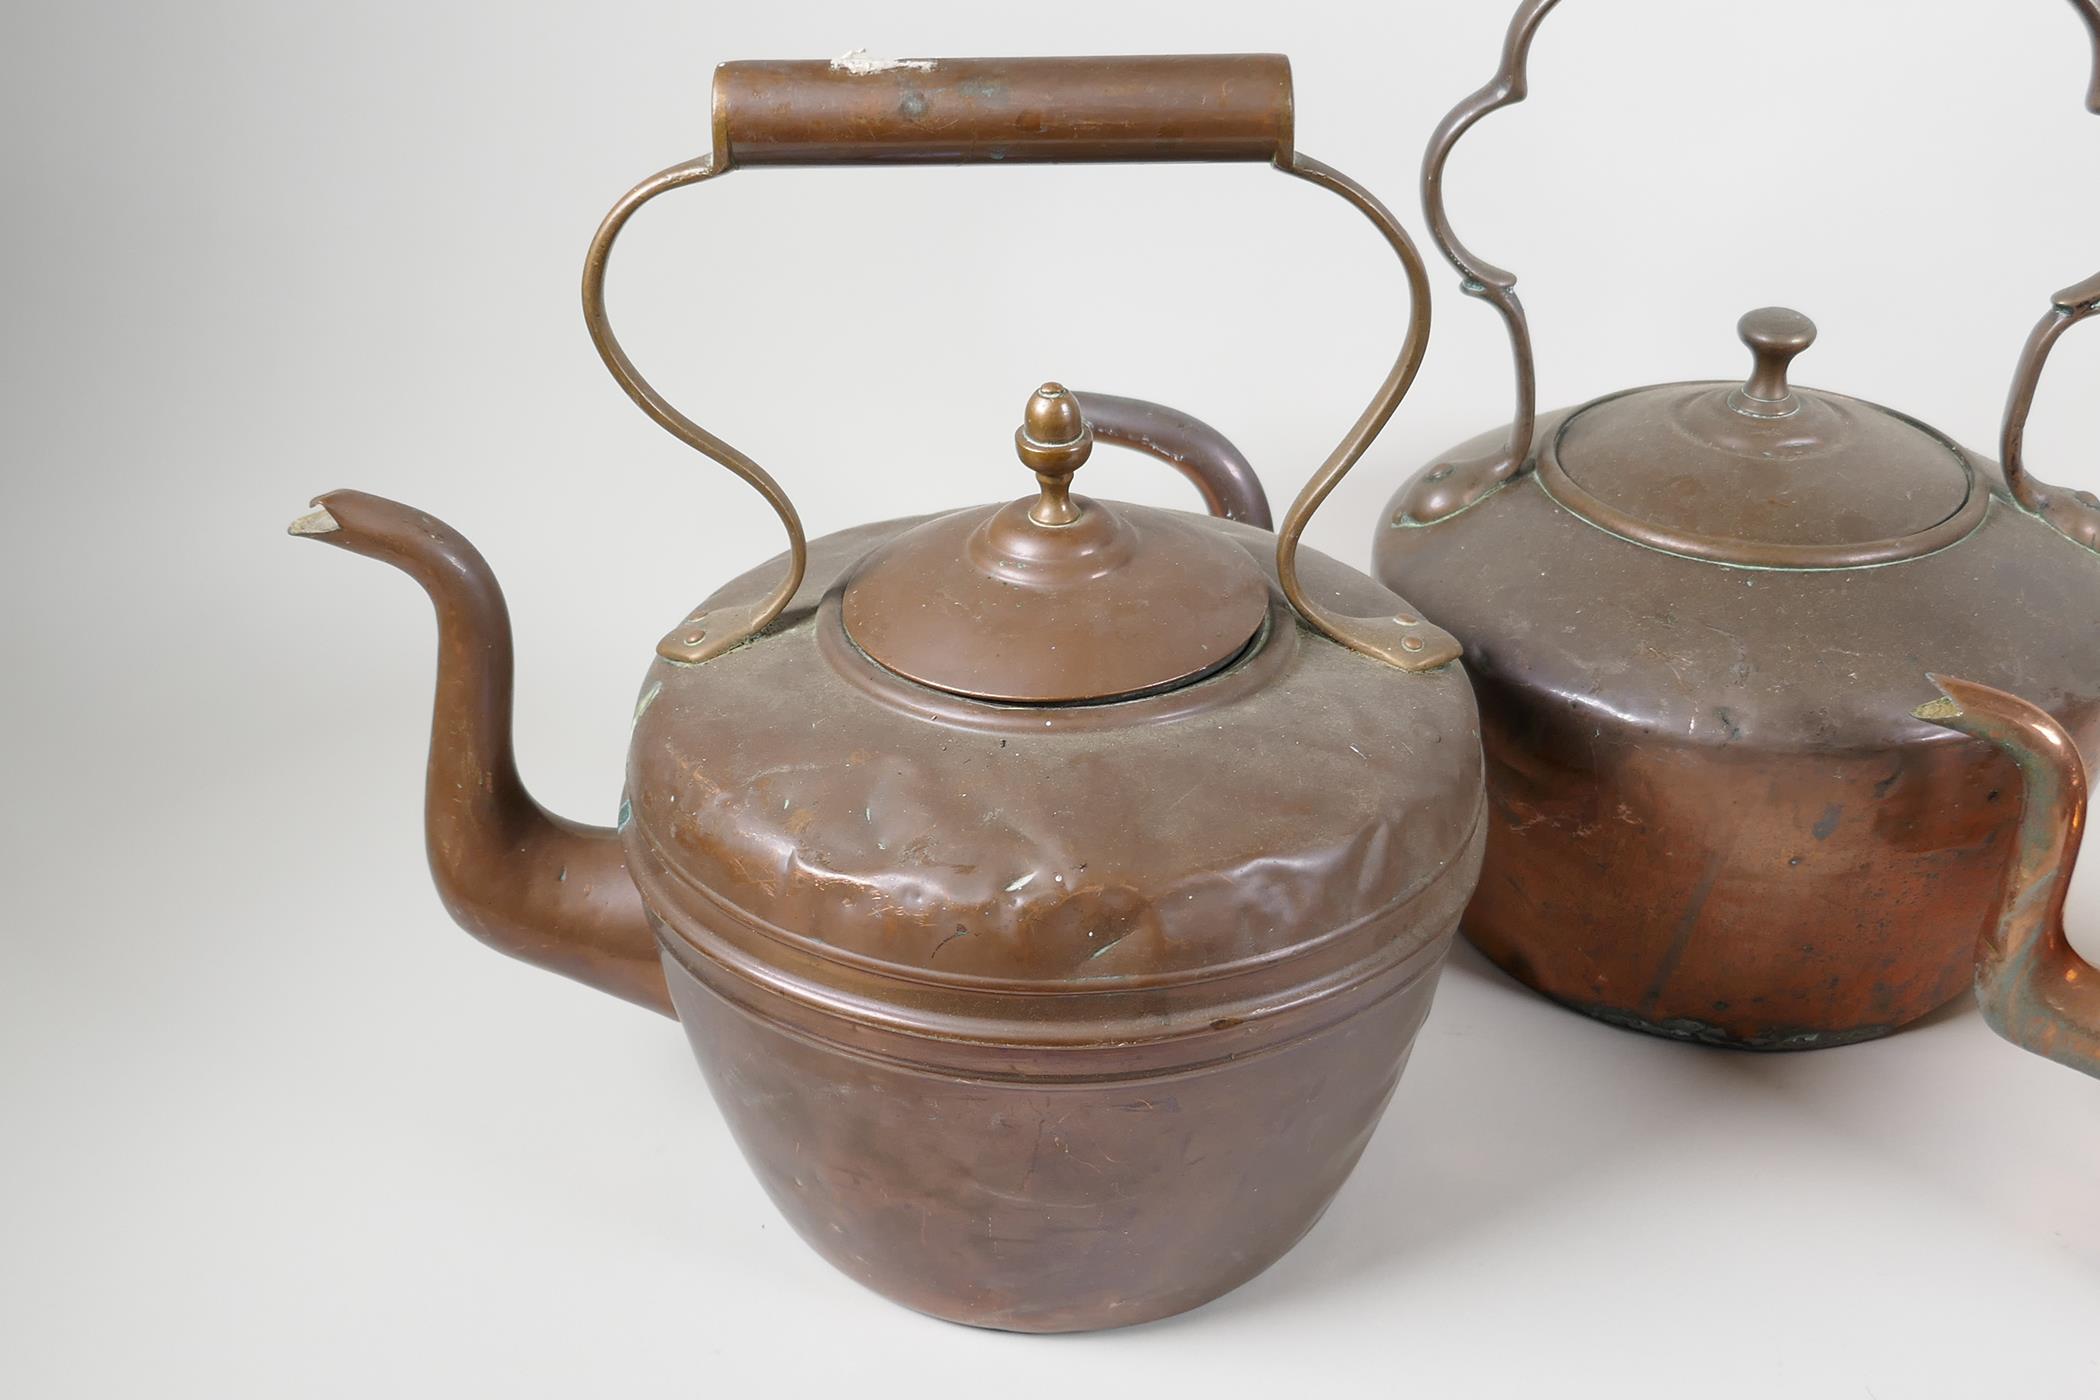 Three C19th copper kettles, largest 12" high - Image 2 of 4